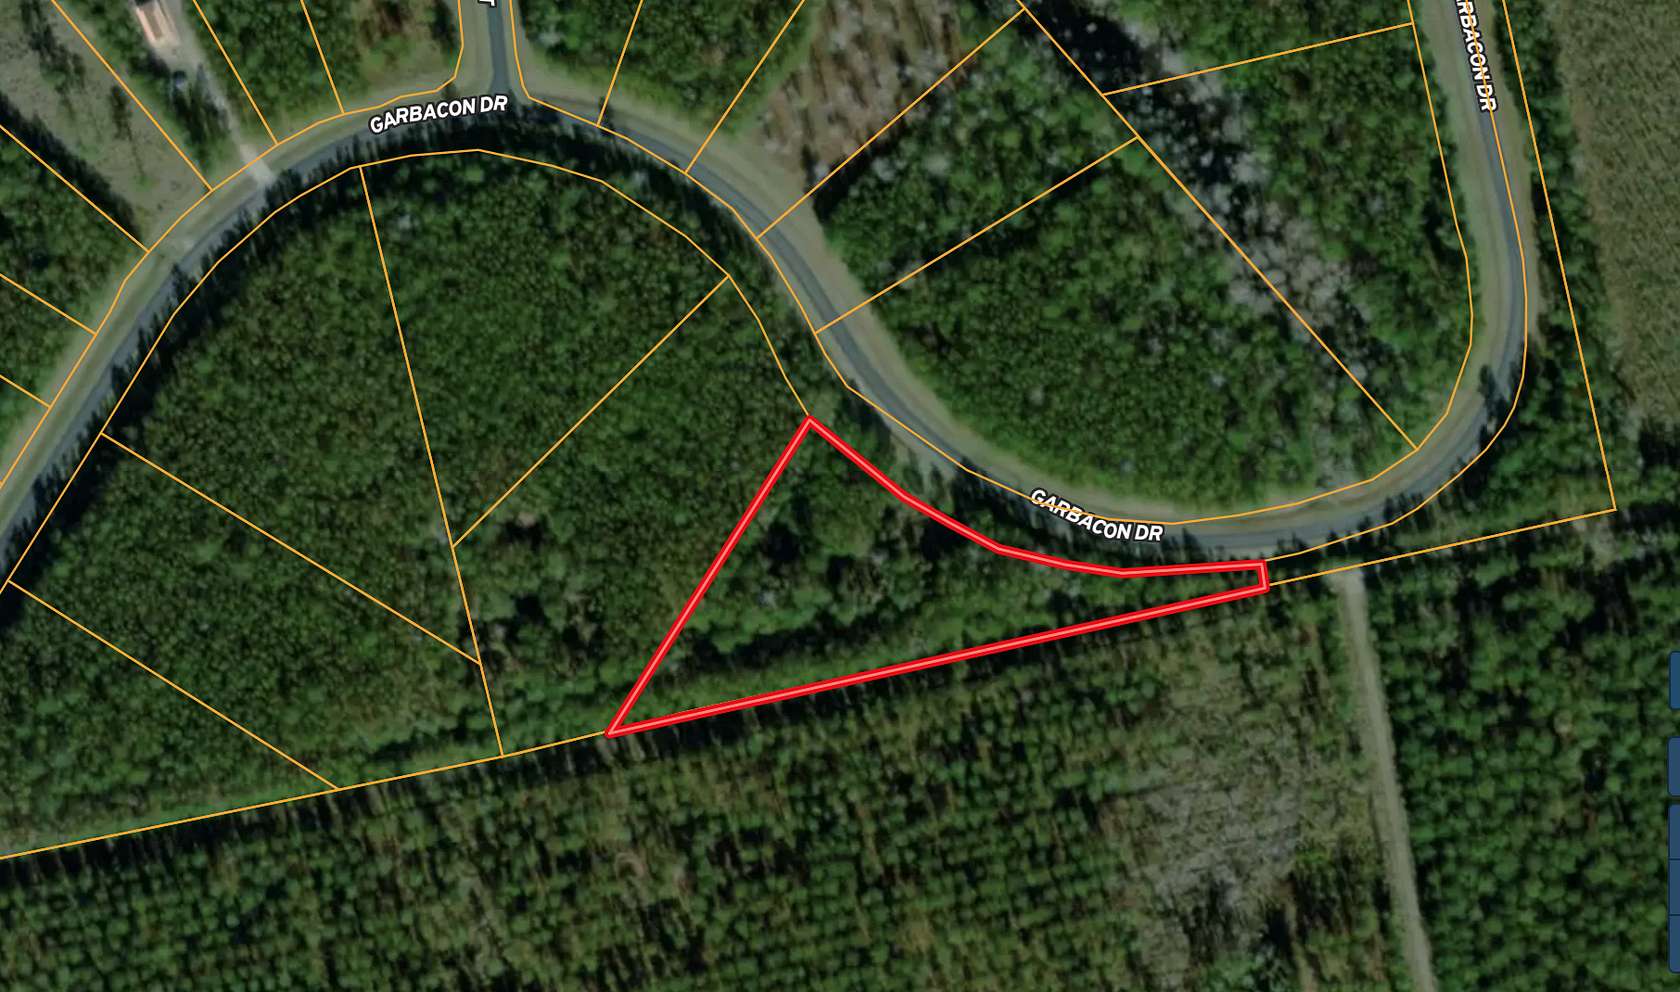 2 Acres of Residential Land for Sale in Beaufort, North Carolina